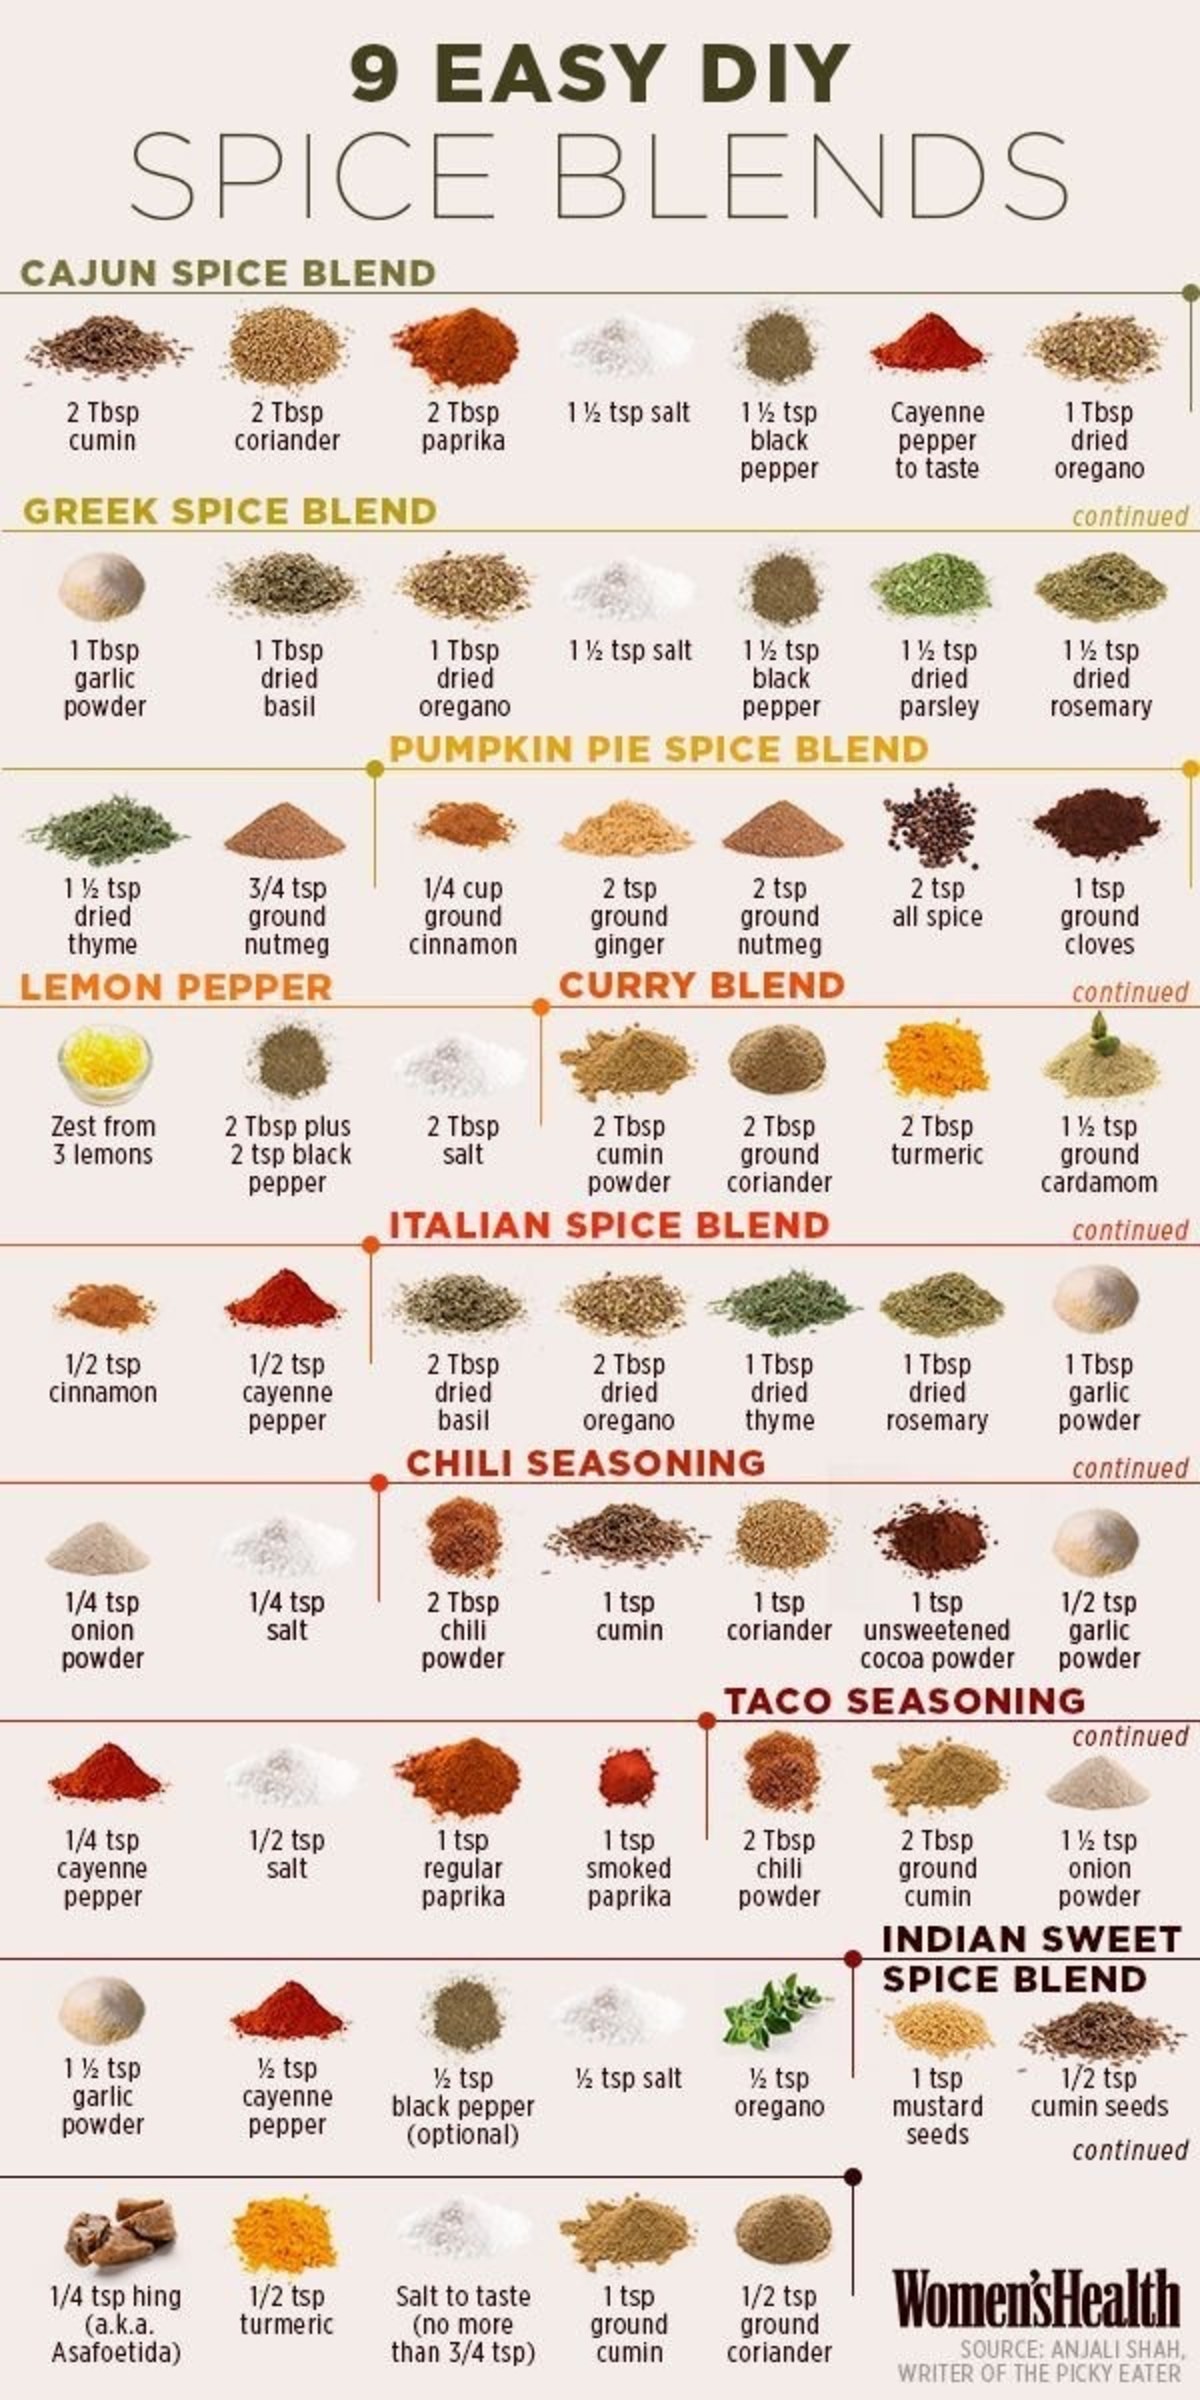 DIY Spice Blends You Can Make At Home